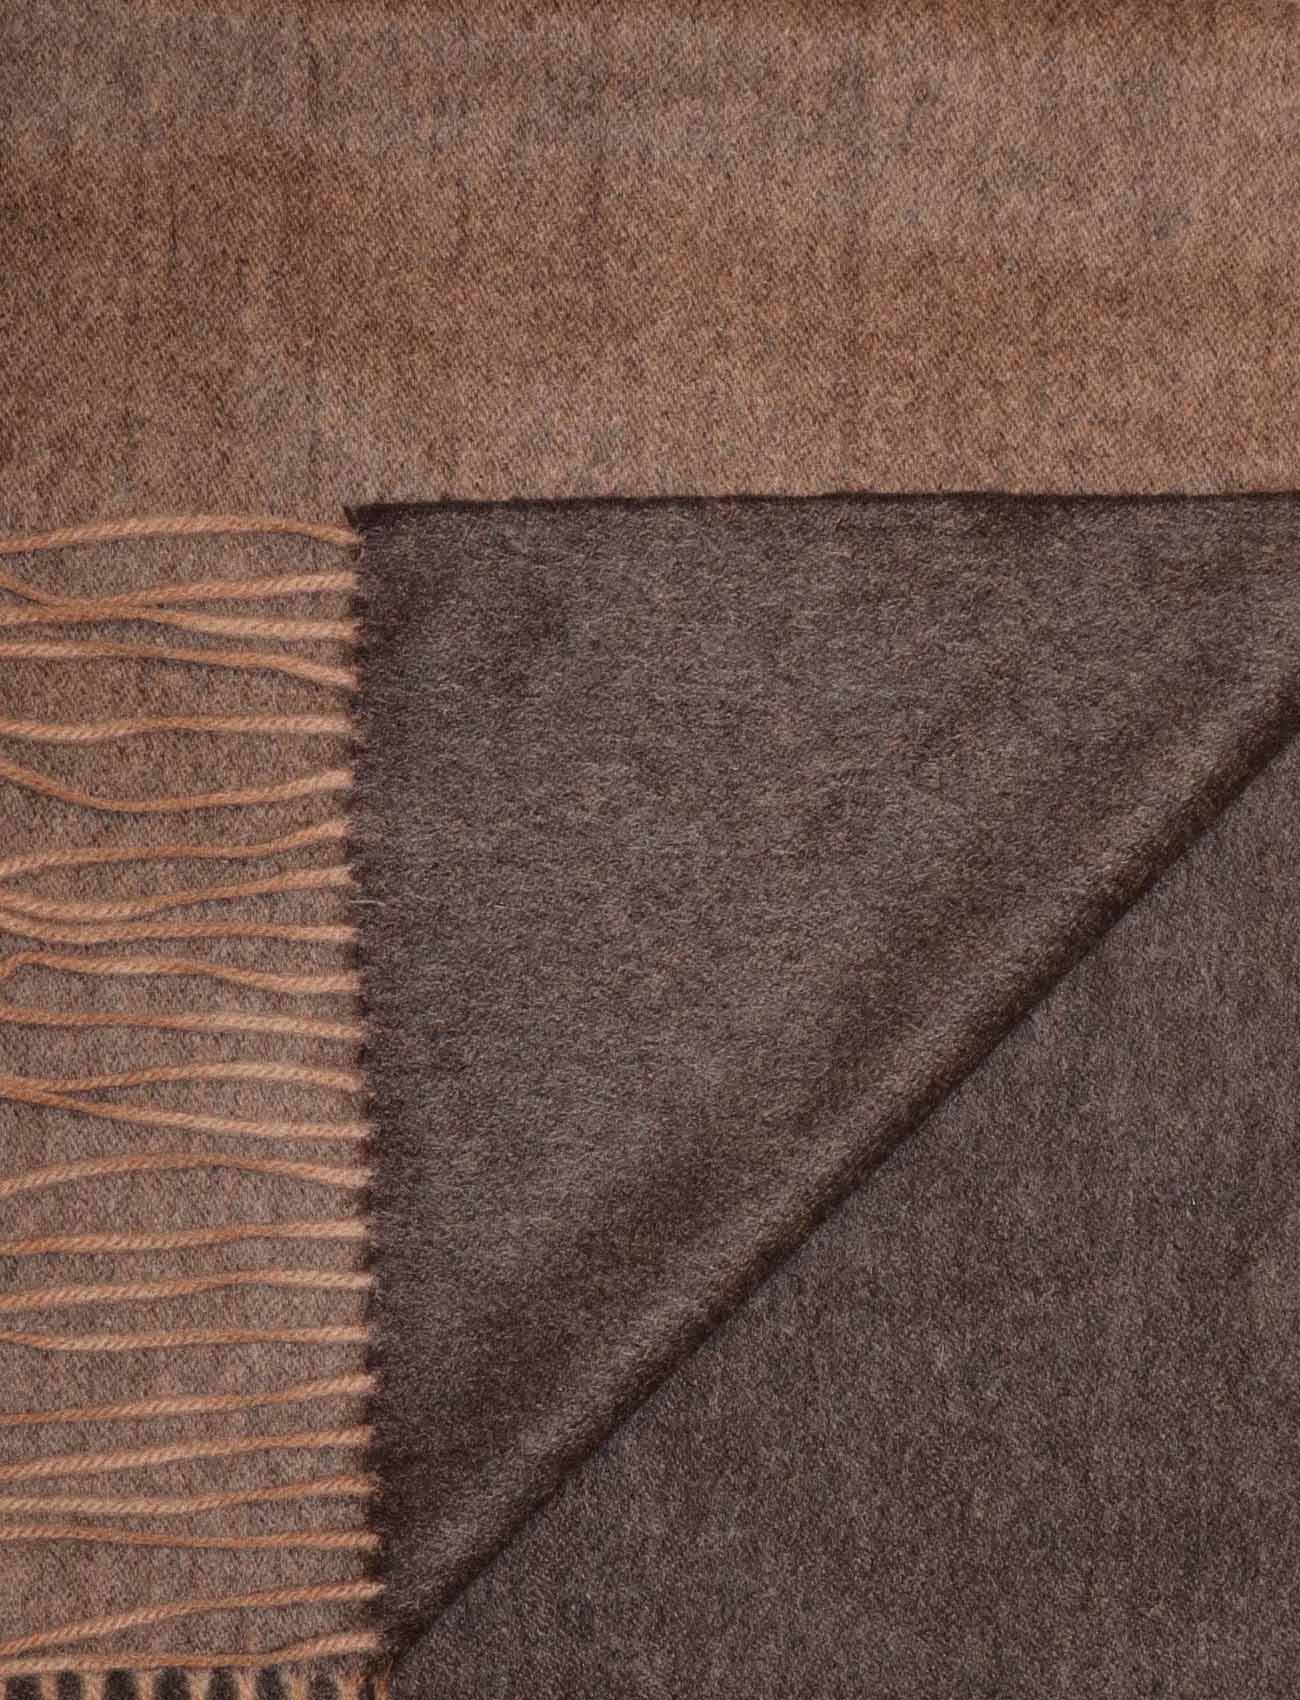 Double face cashmere scarf in brown for women and men  details